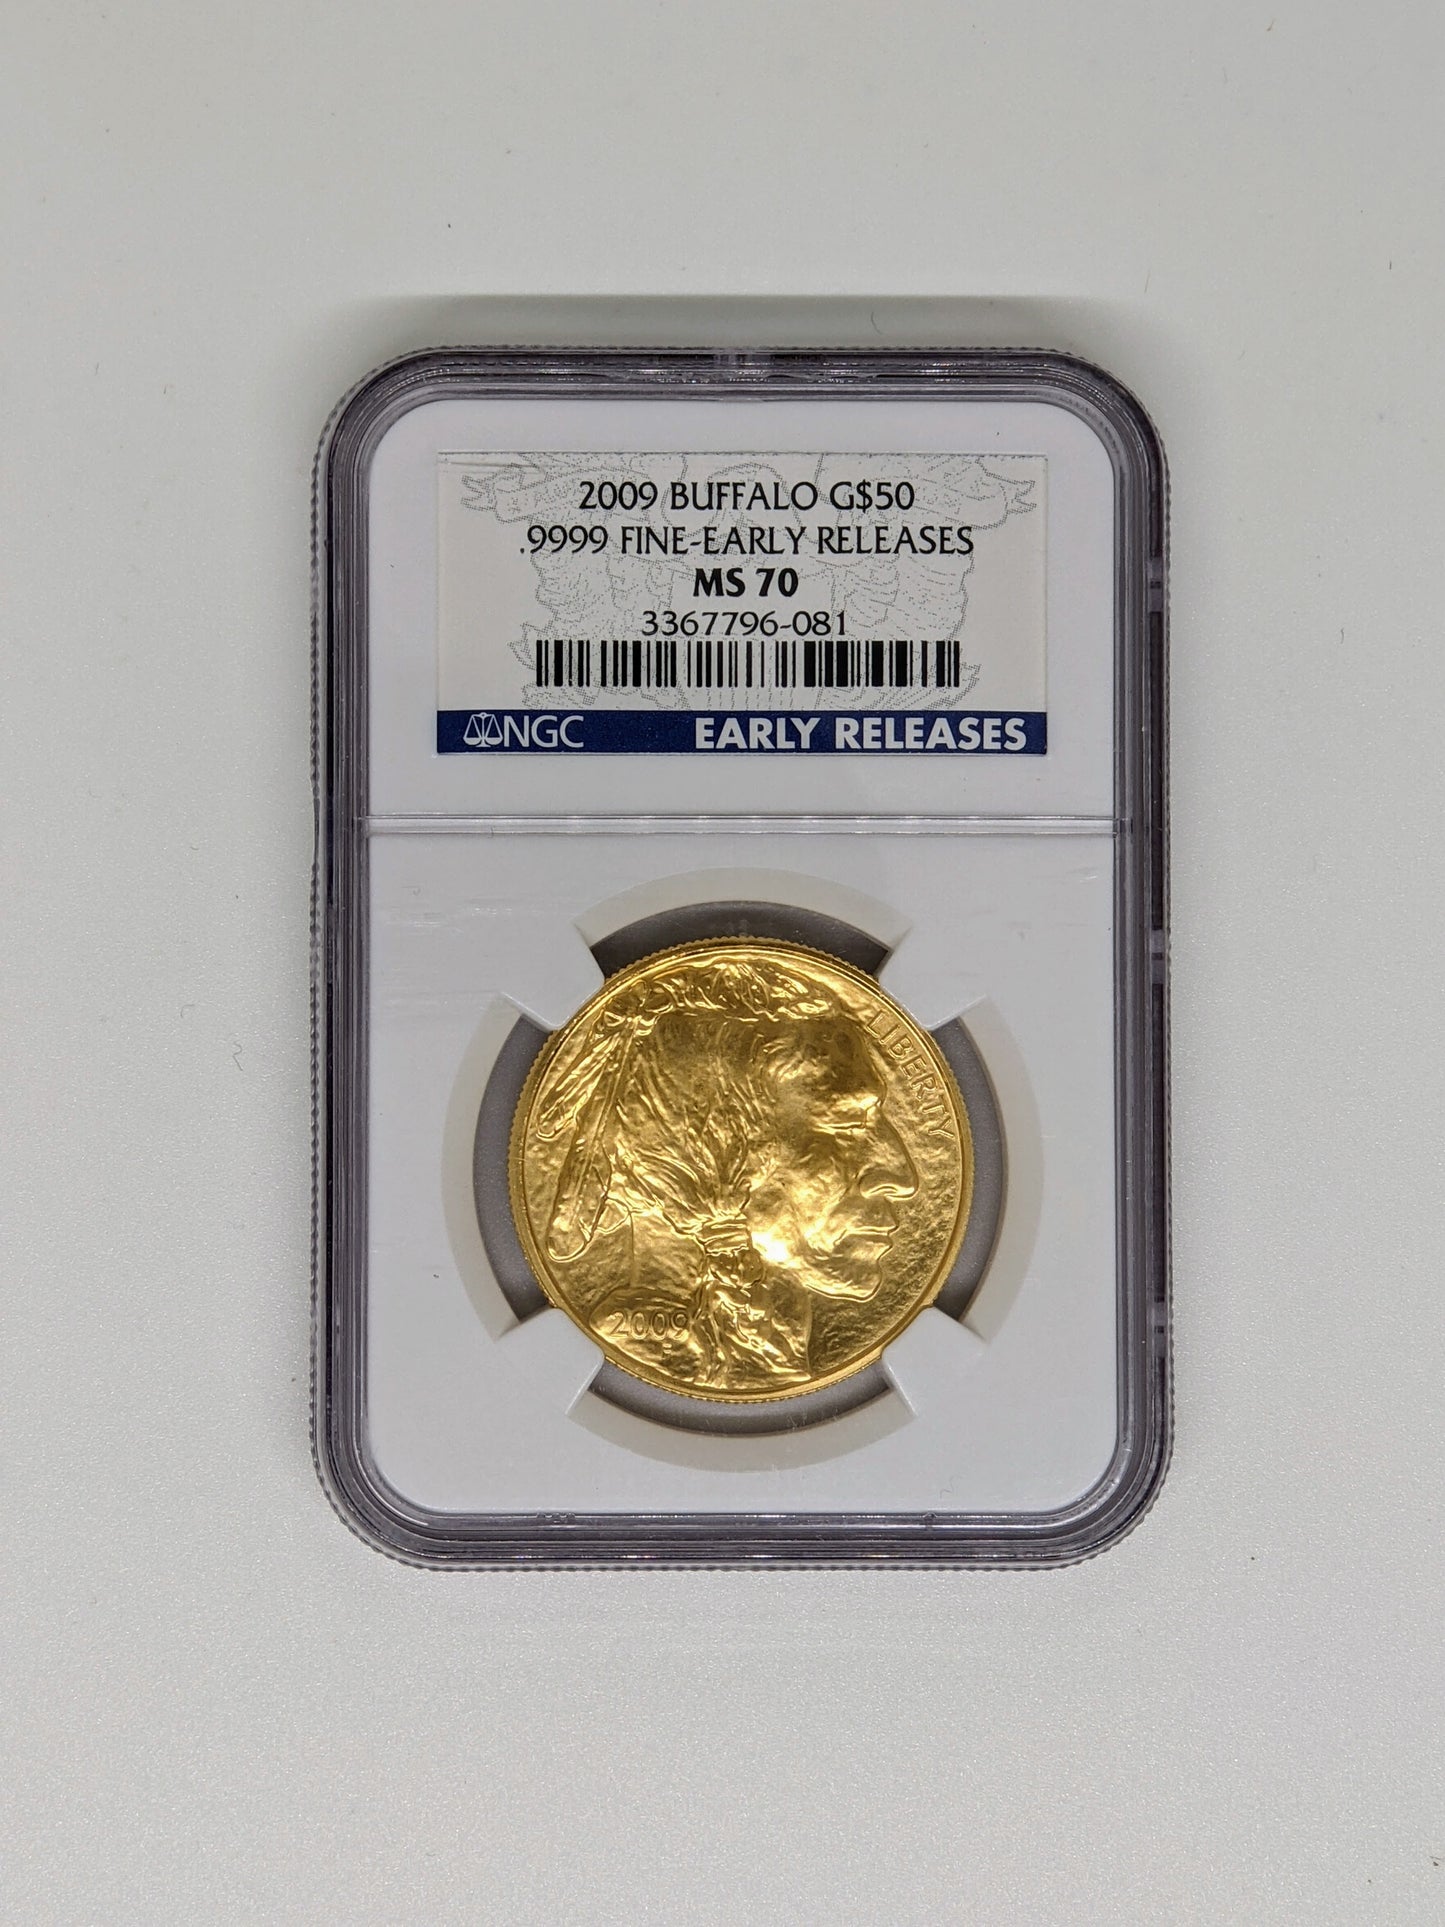 2009 1 oz. Gold Buffalo Coin, Early Releases MS70 NGC